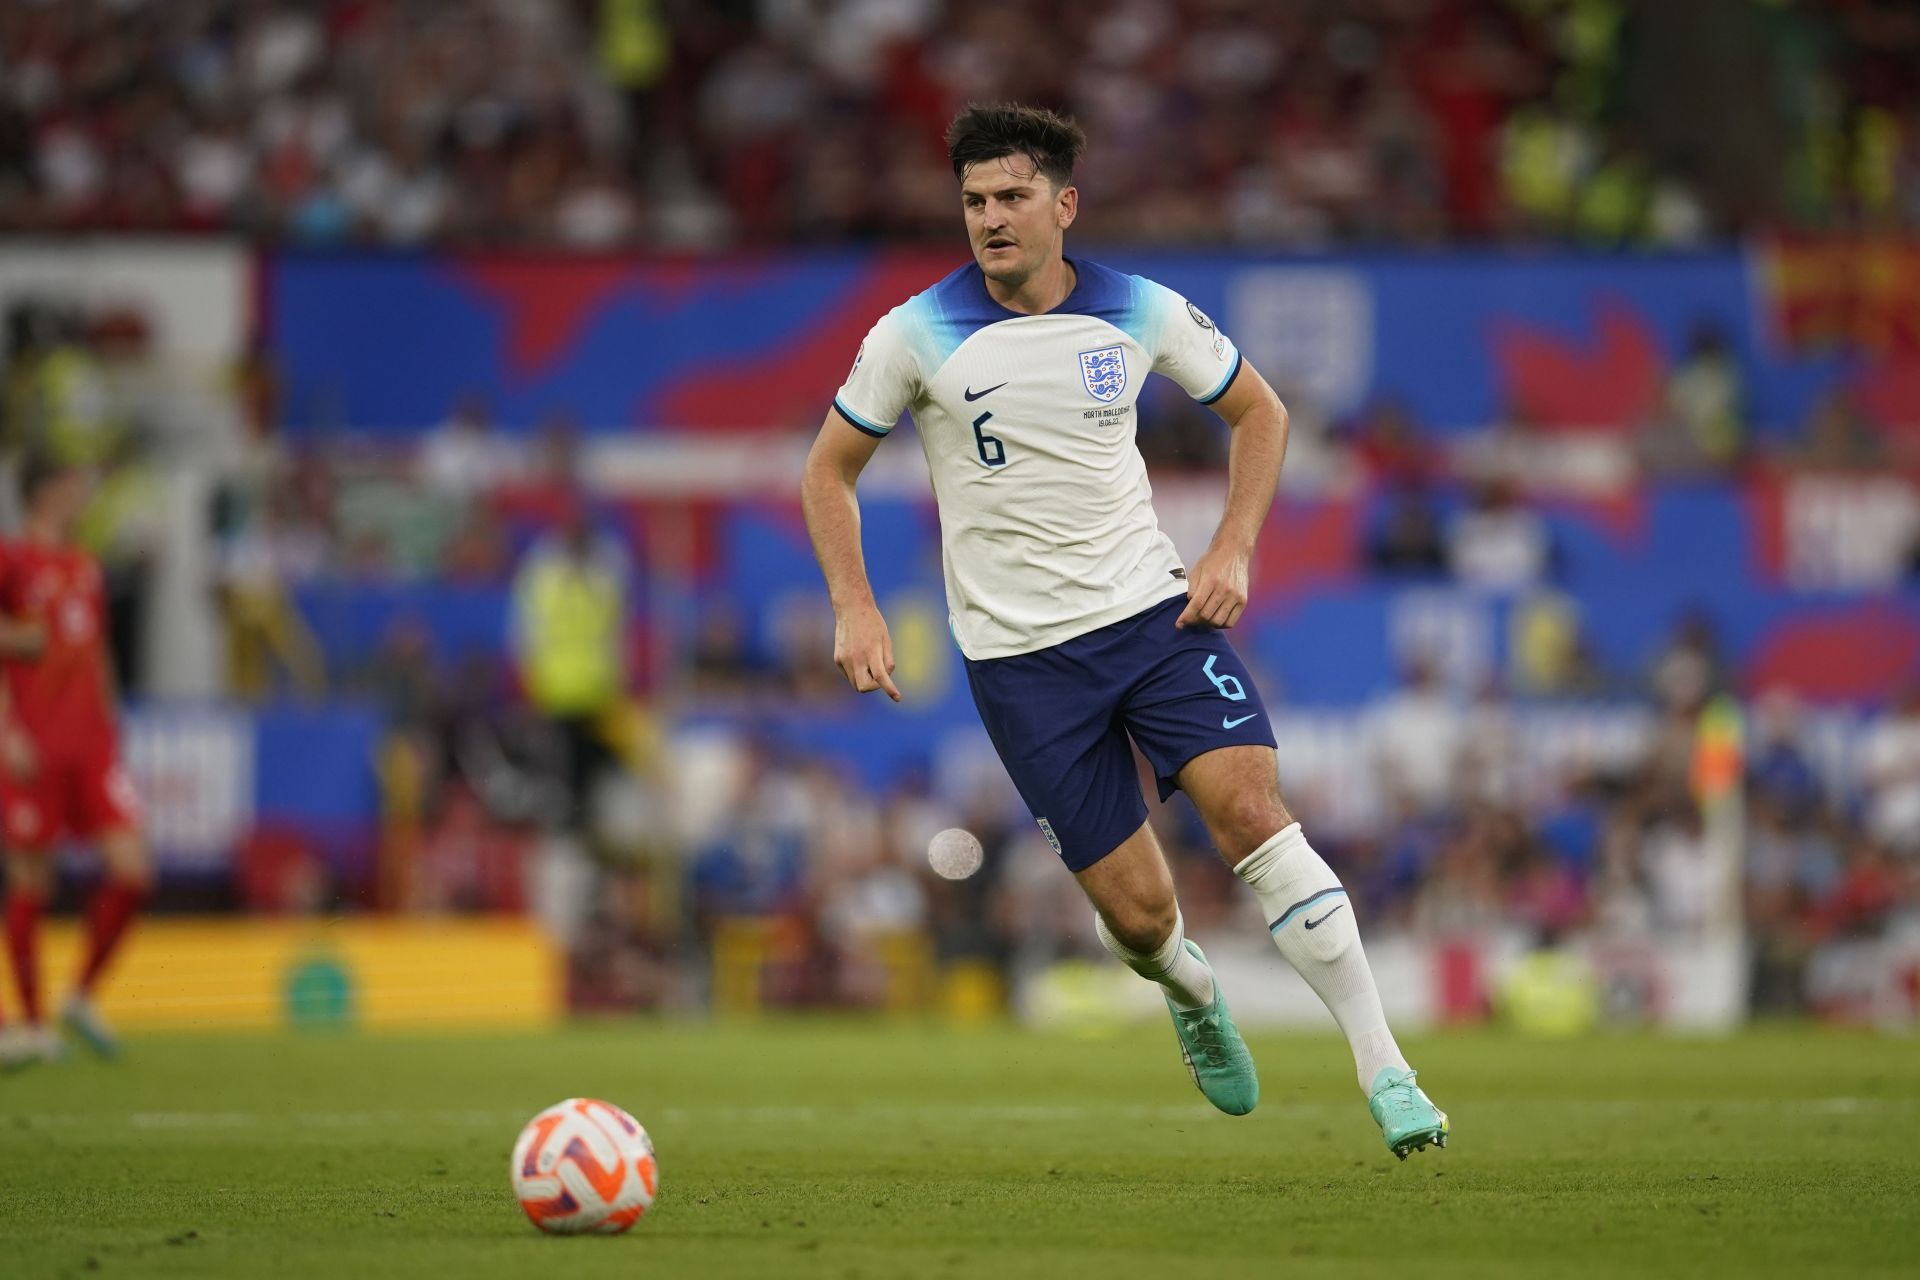 Harry Maguire could be on his way out of Old Trafford this summer